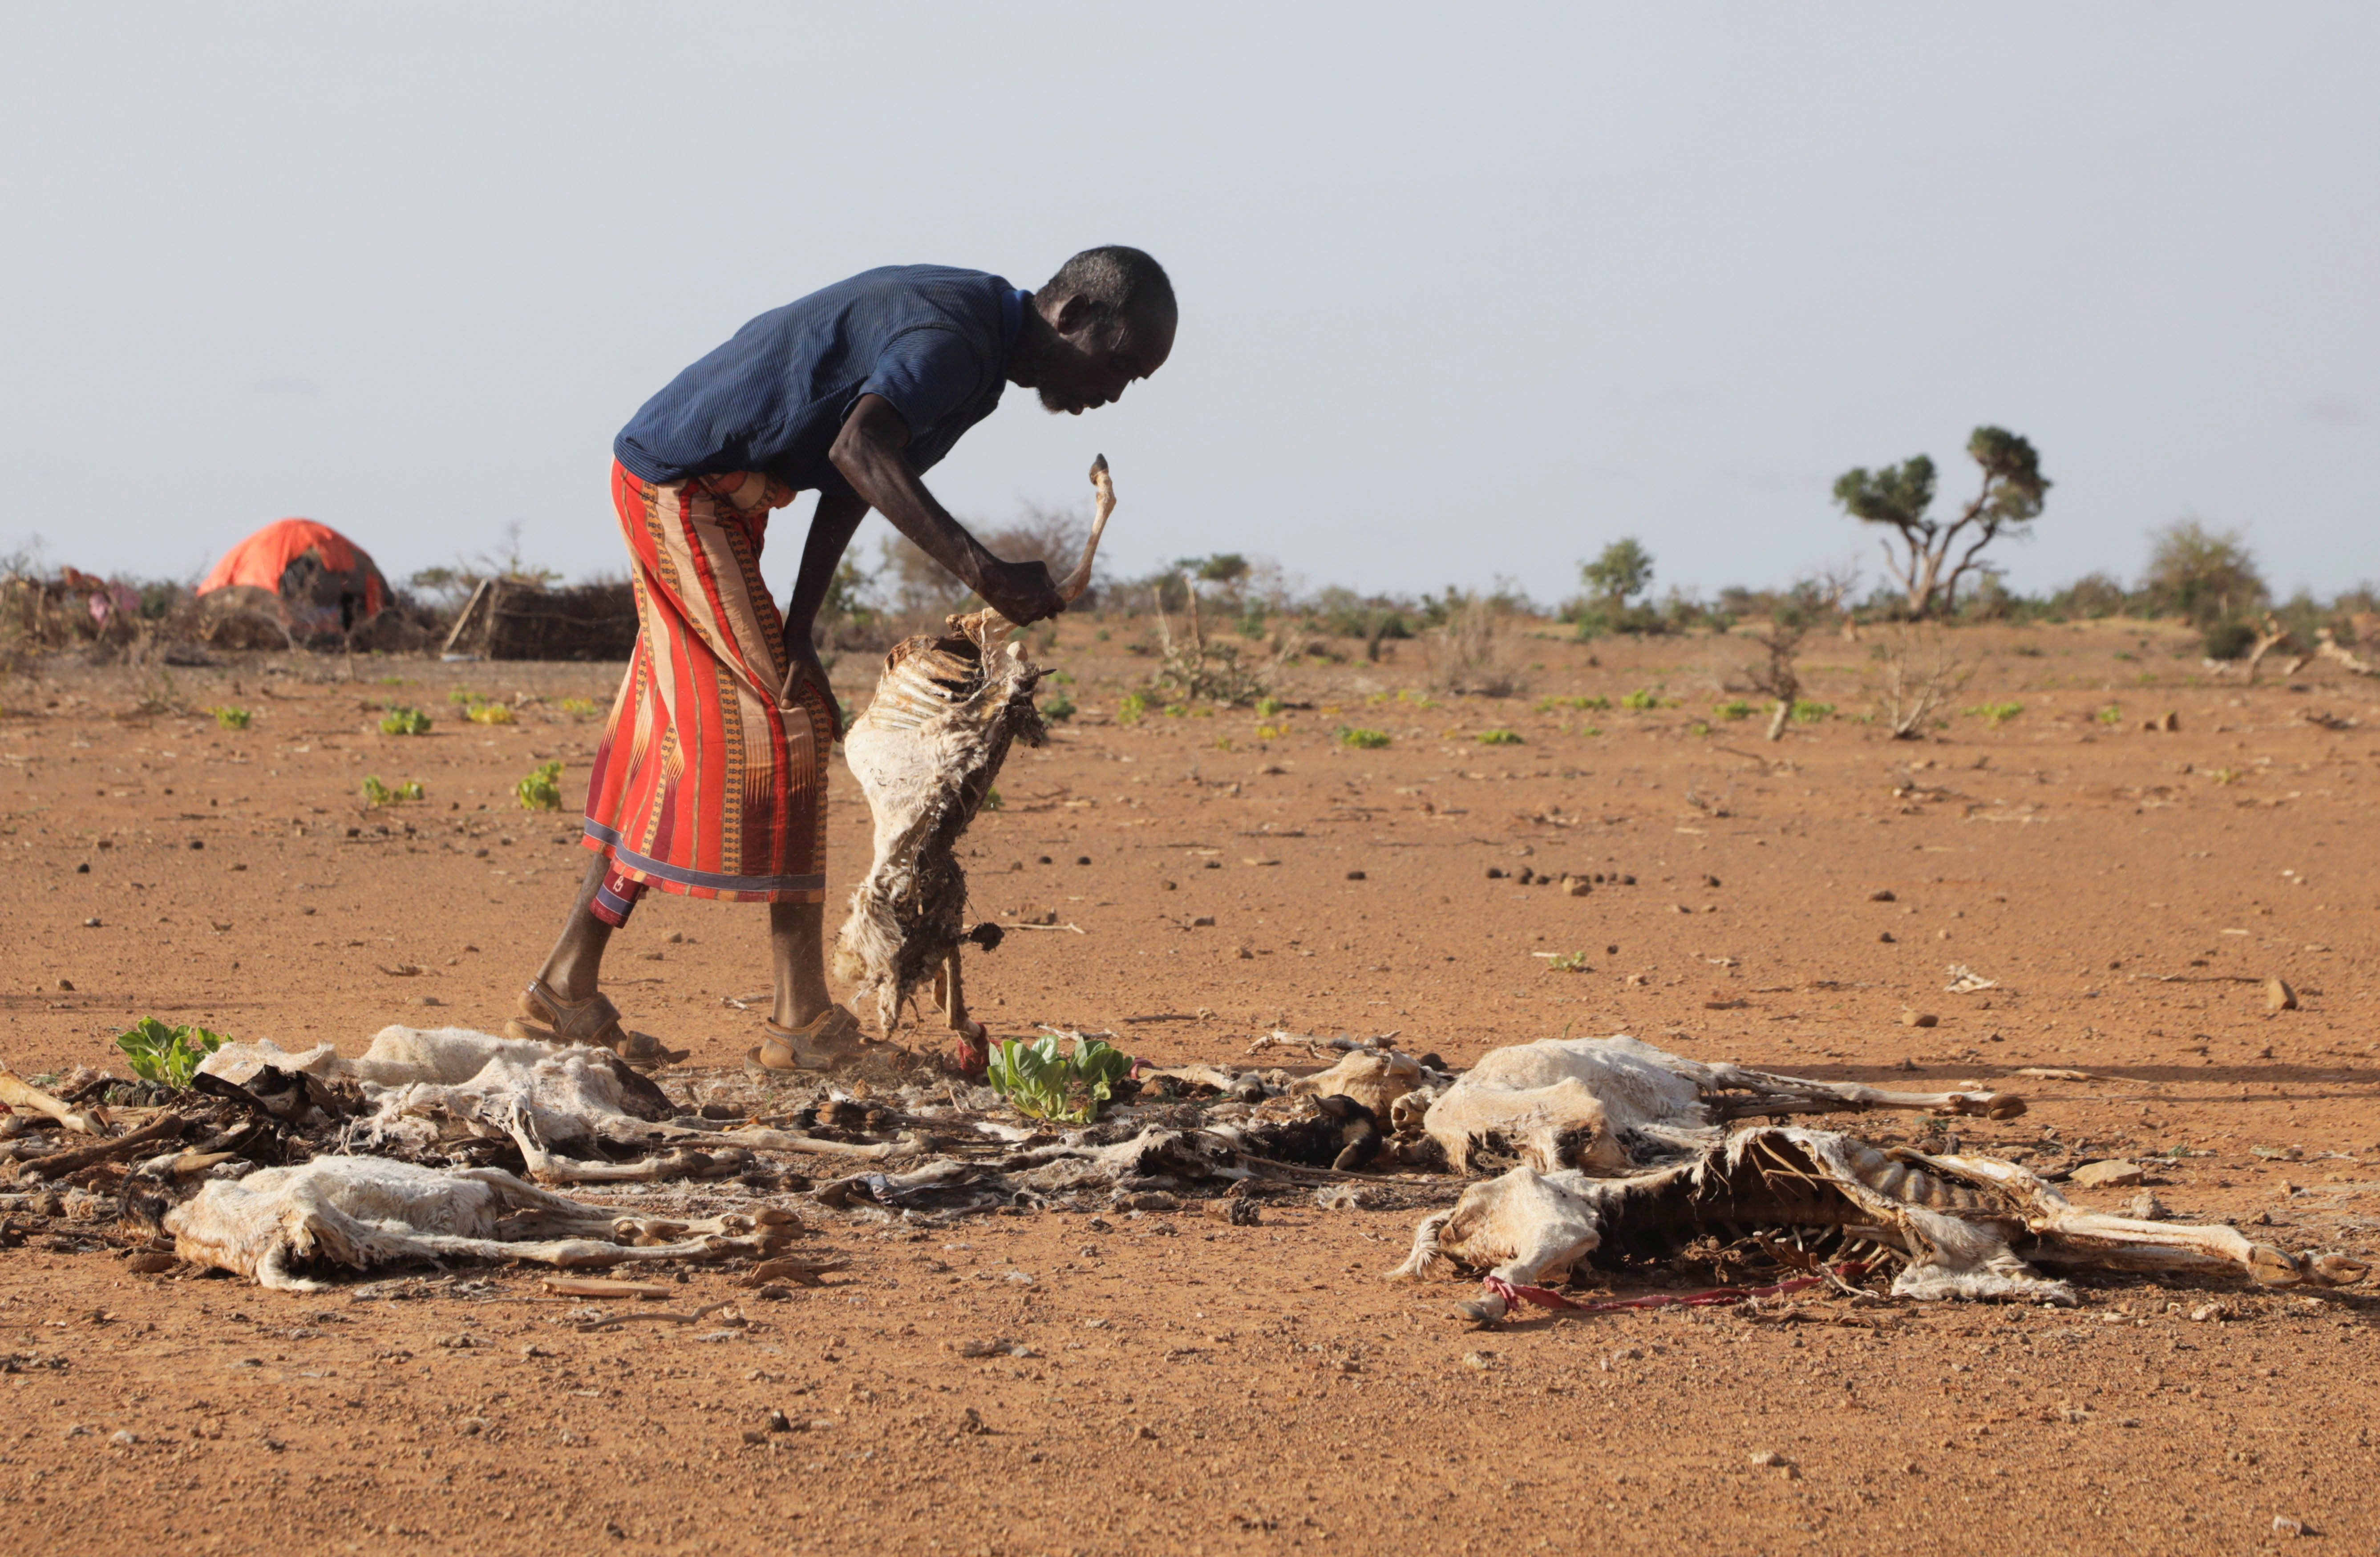 Dhicis Guray, an internally displaced Somali man attends to the carcass of his dead livestock following severe droughts near Dollow town of Gedo Region